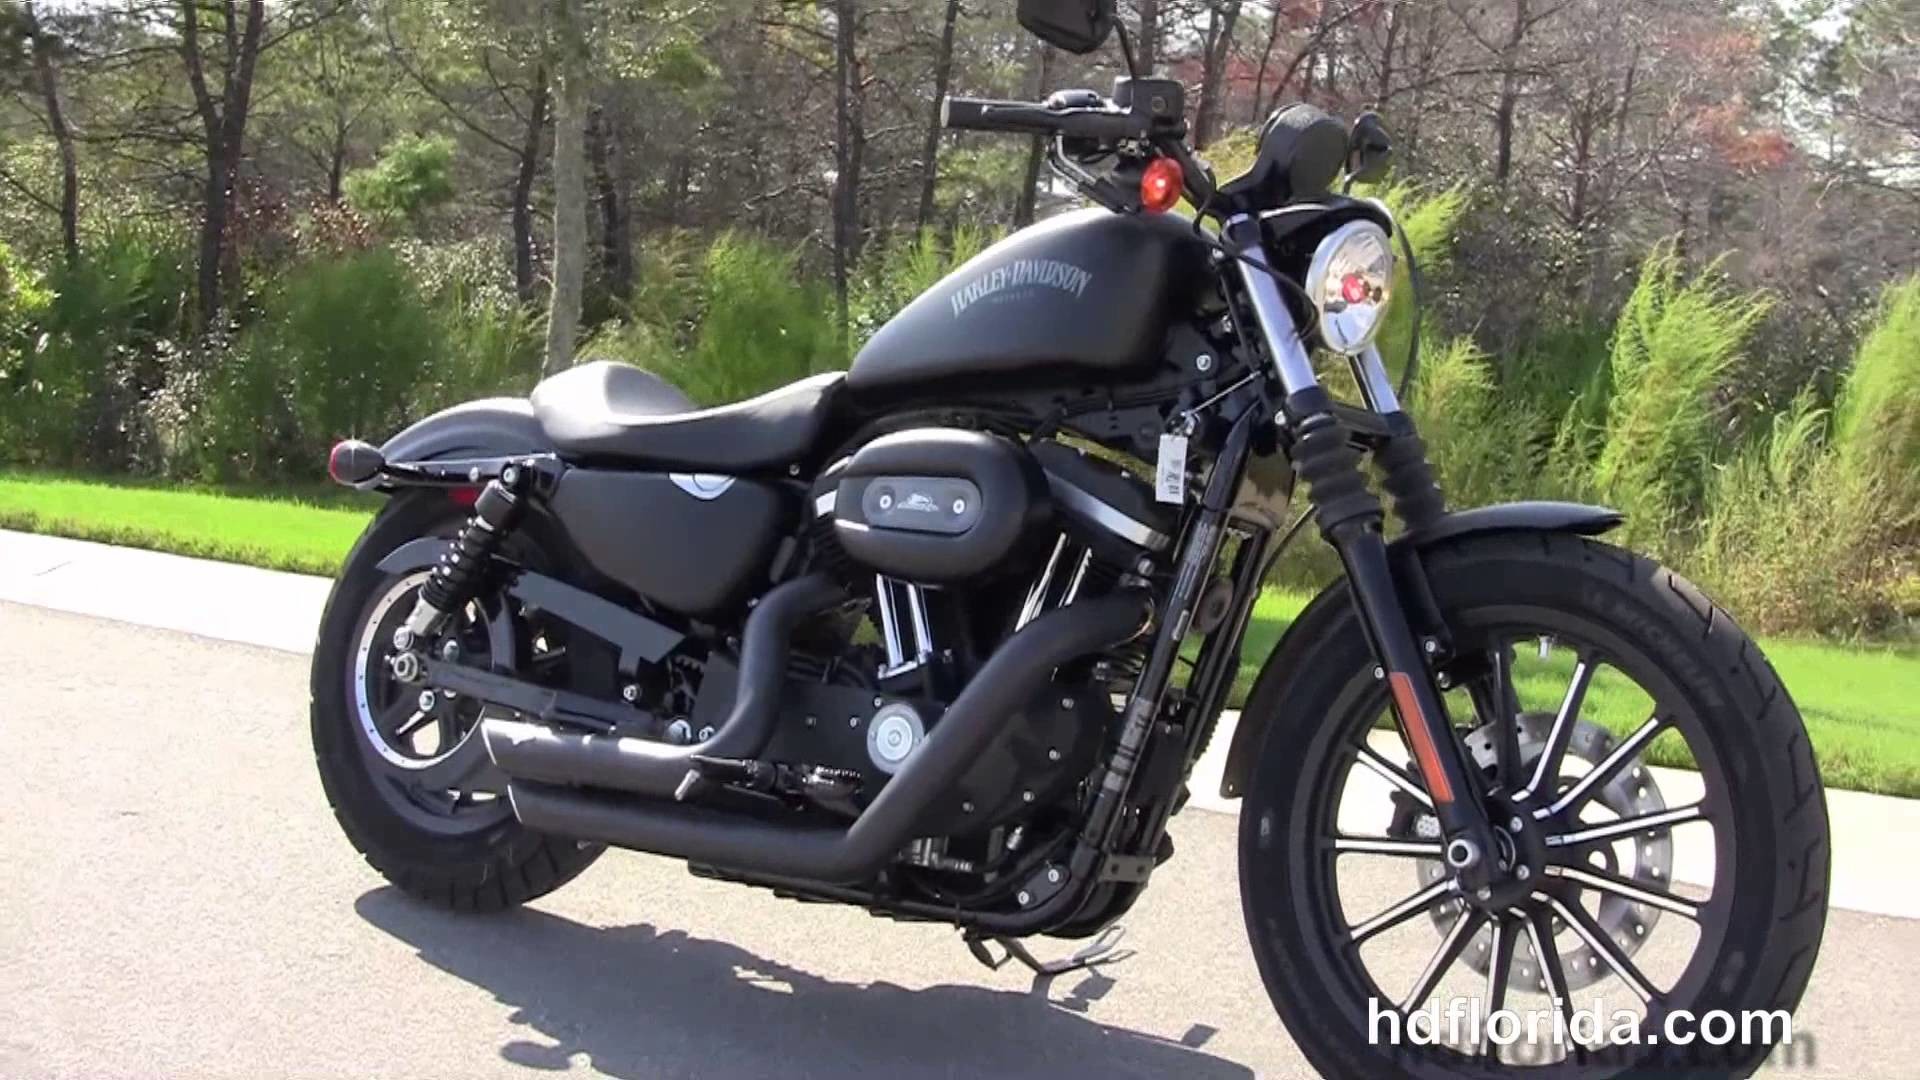 1920x1080 Harley Davidson Iron 883 for Sale New New 2015 Harley Davidson Iron 883  Motorcycles for Sale